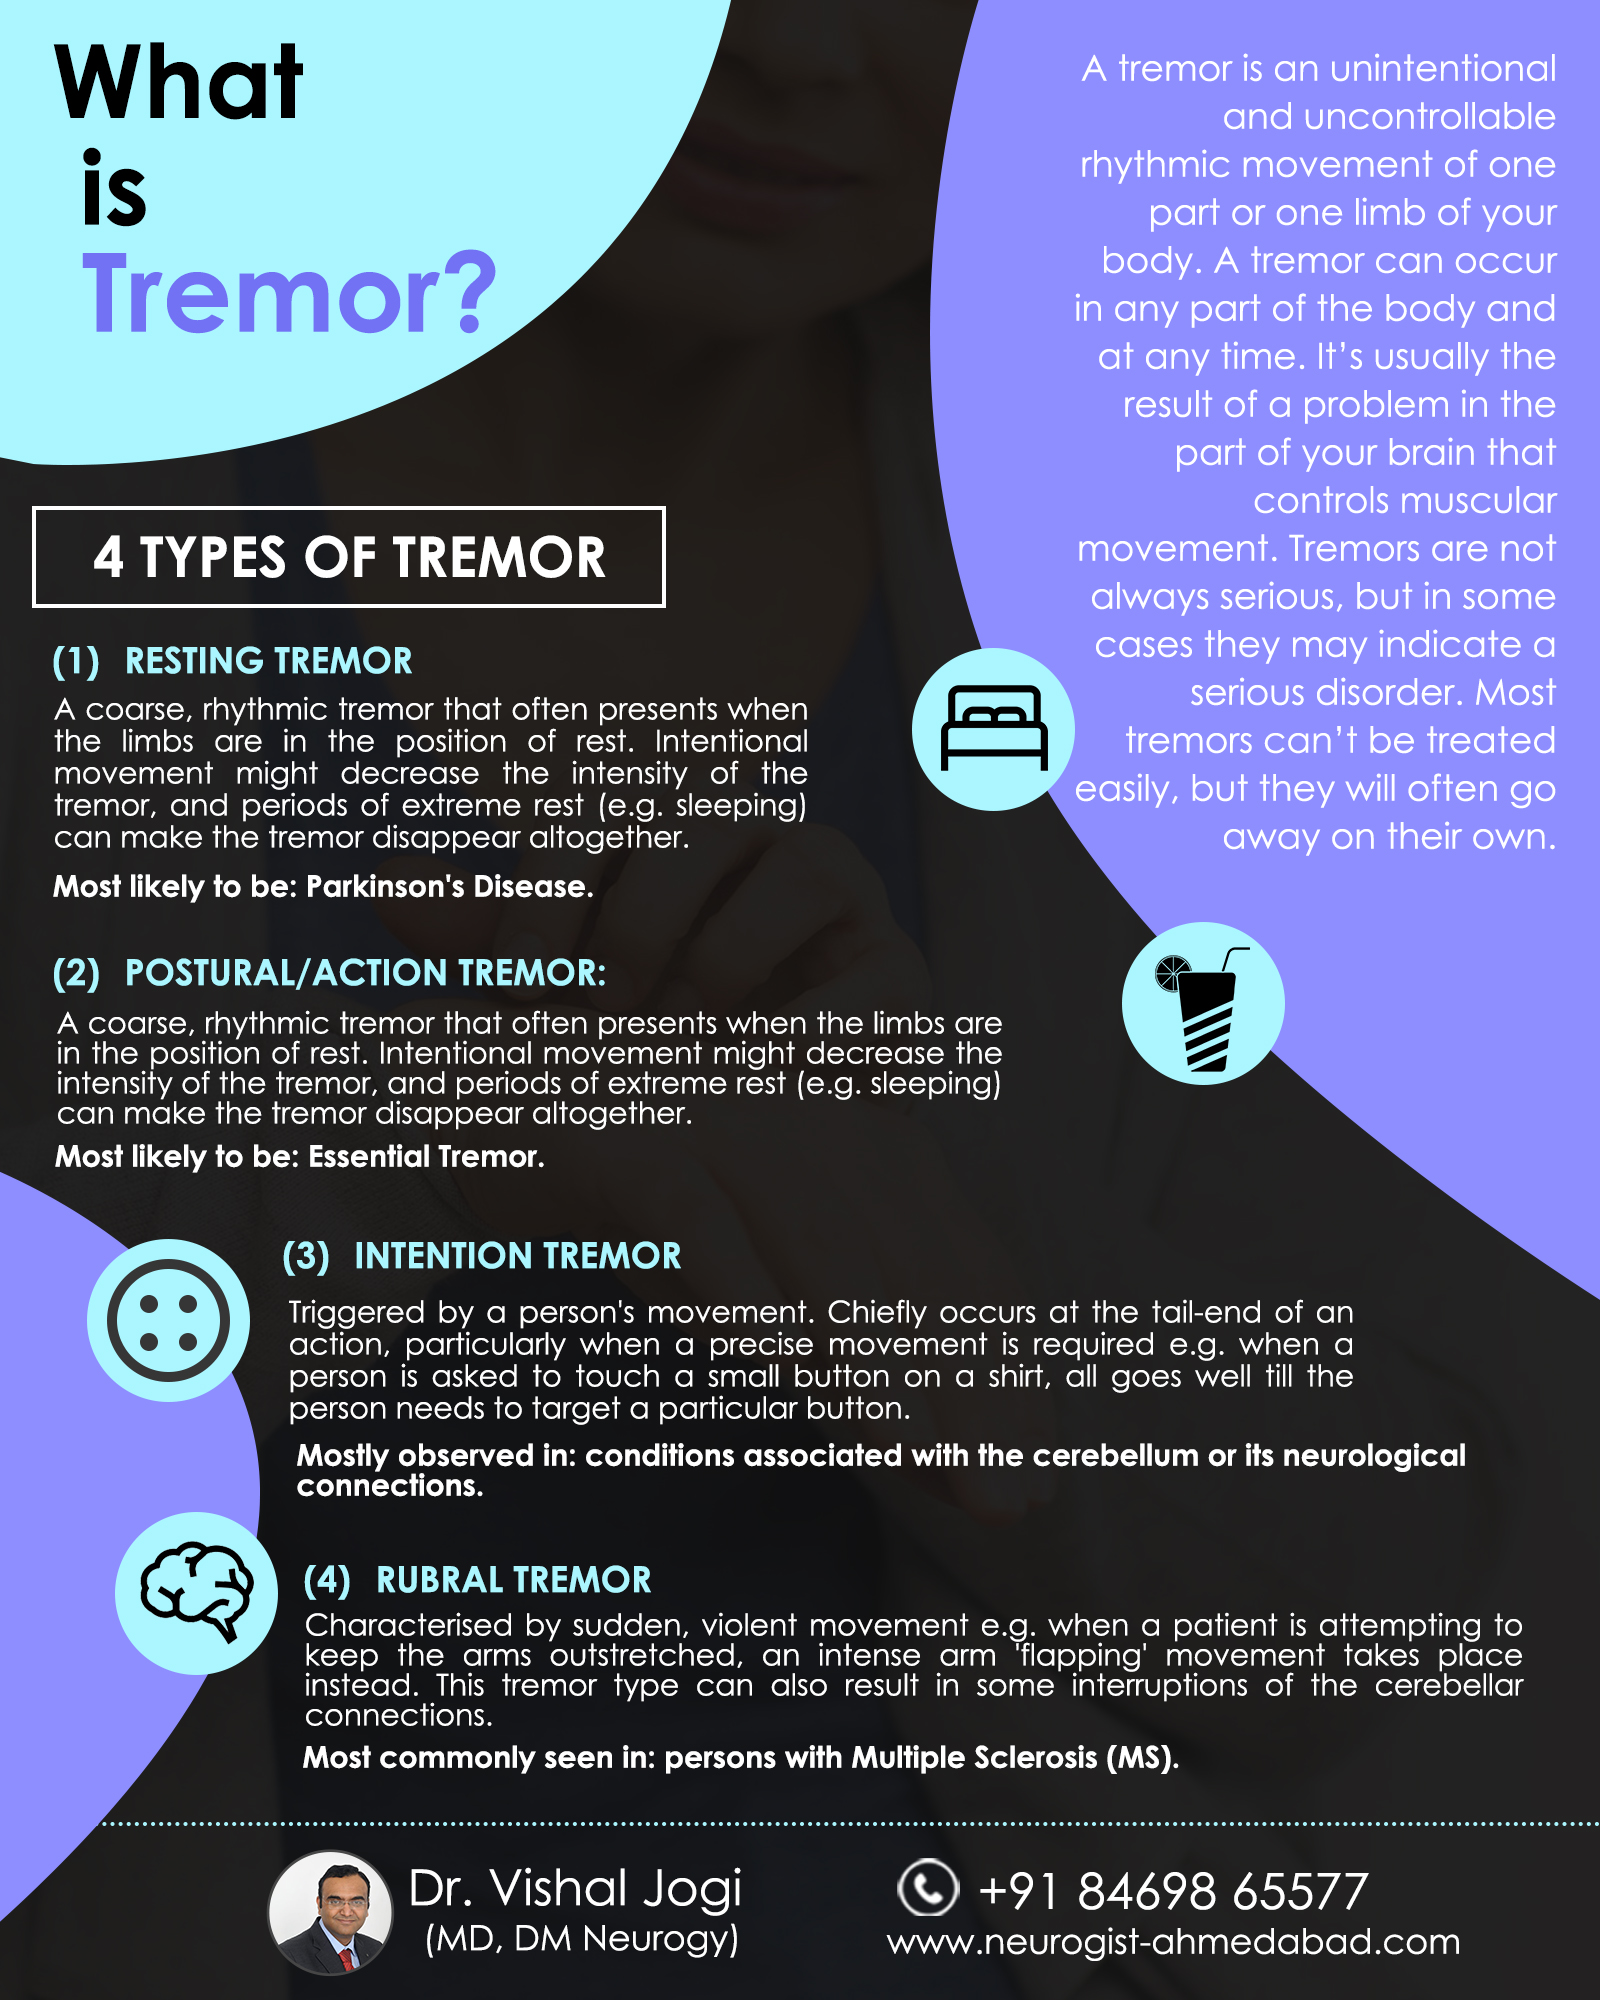 Tremors: Types, Causes, Treatments, and More